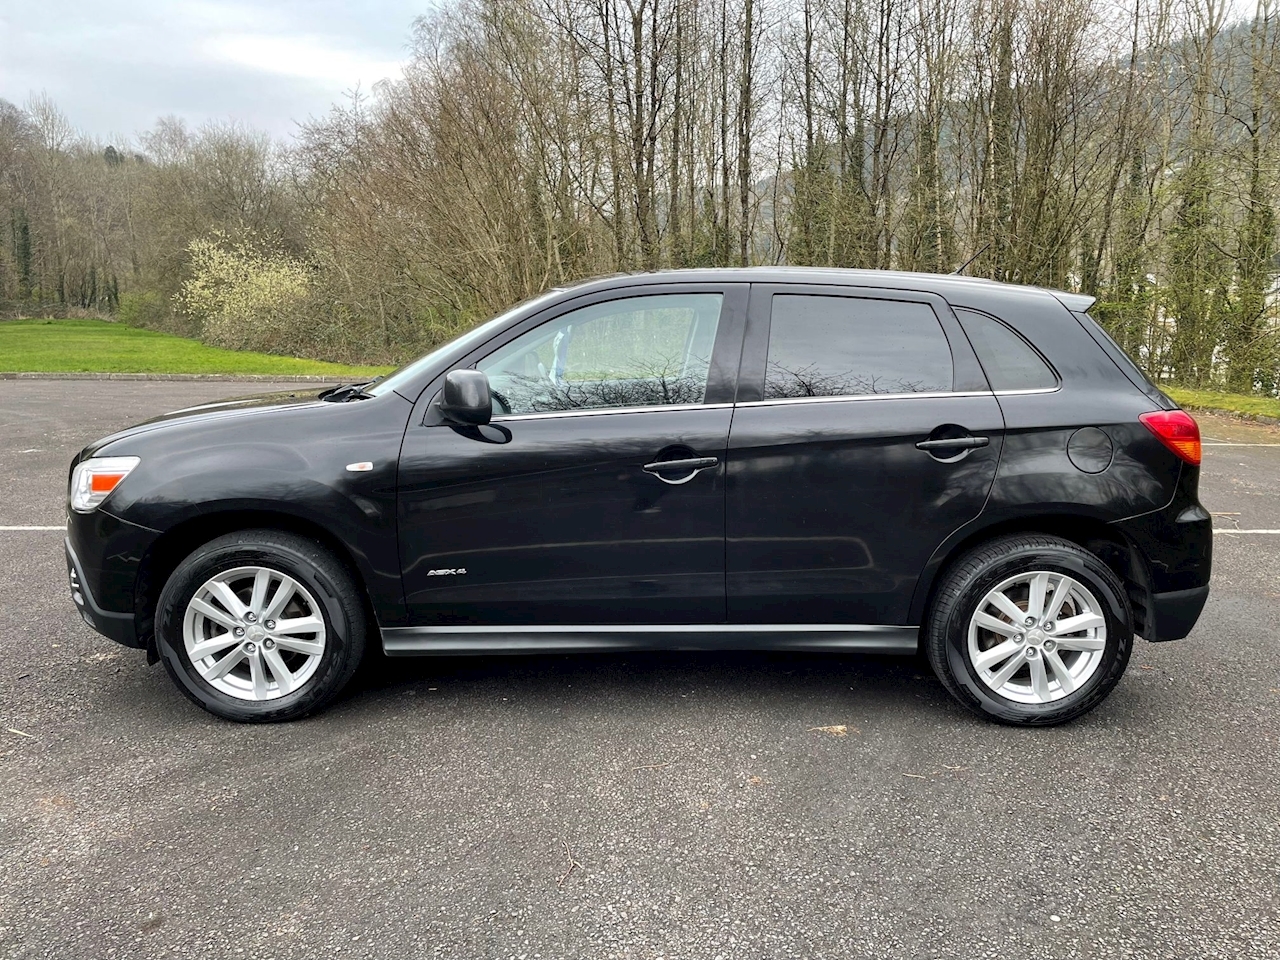 1.8D ClearTec 4 SUV 5dr Diesel Manual 4WD (150 g/km, 147 bhp)